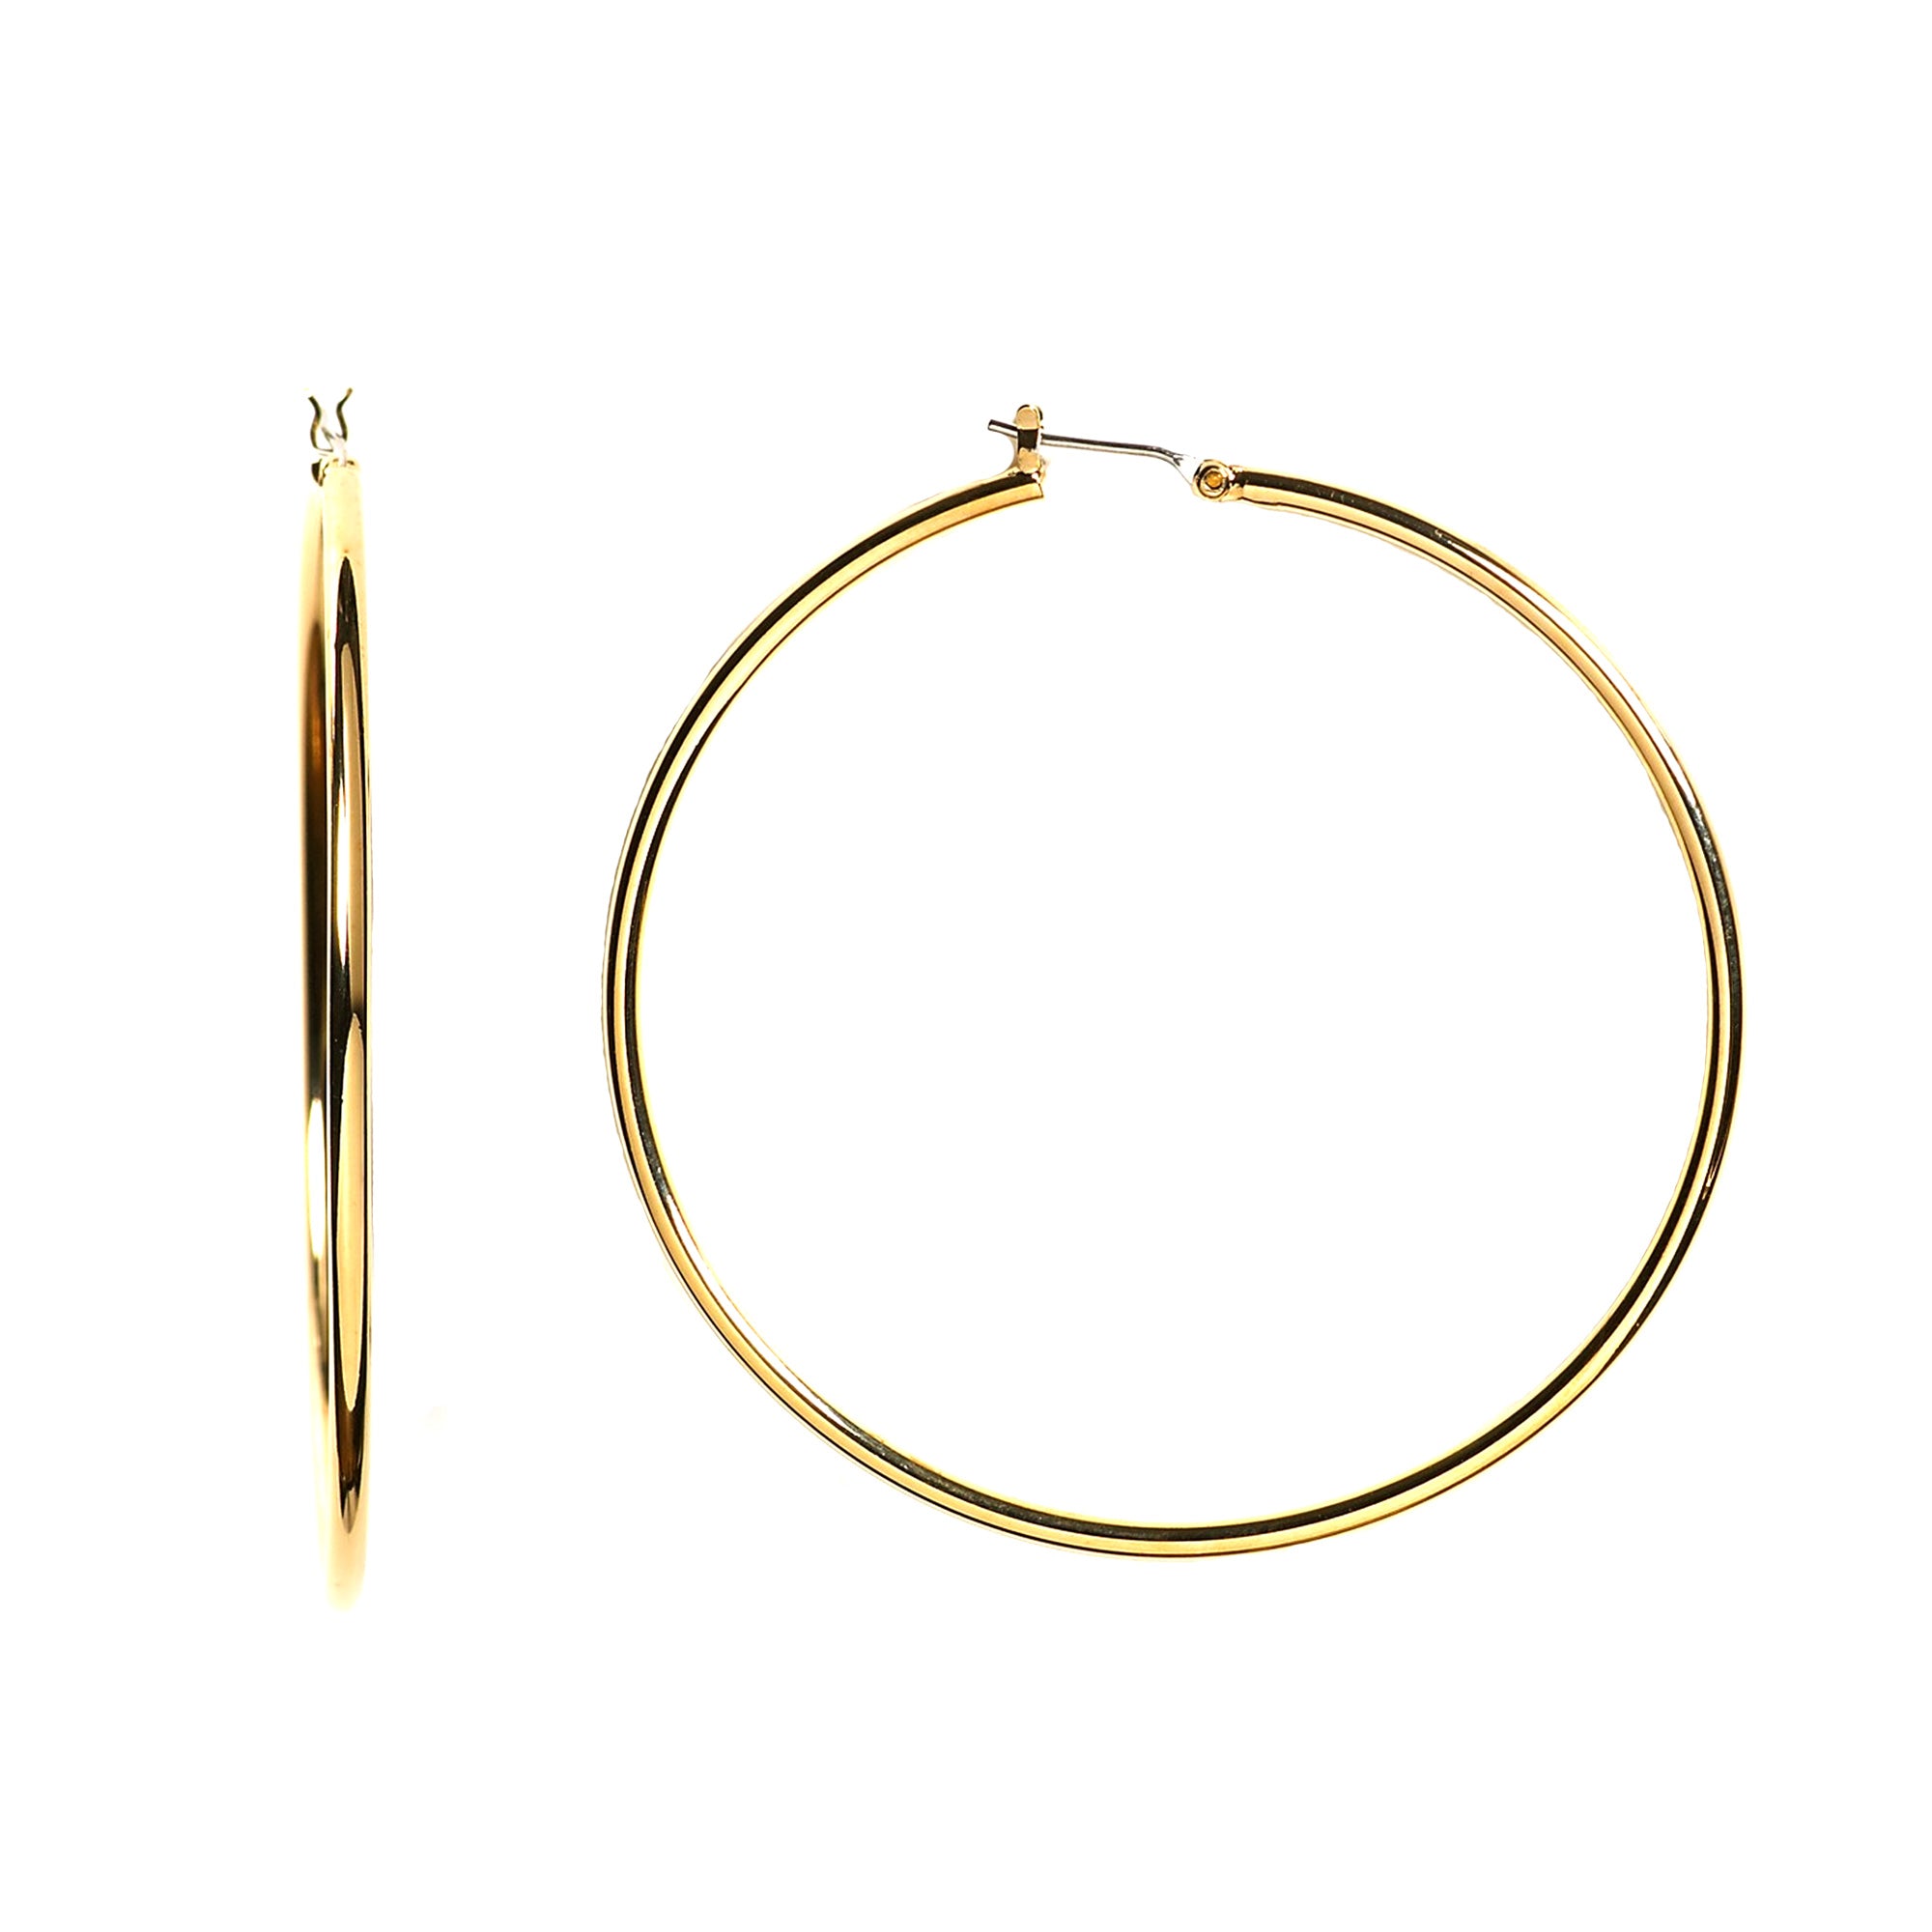 10k Yellow Gold 1.5mm Shiny Round Tube Hoop Earrings fine designer jewelry for men and women